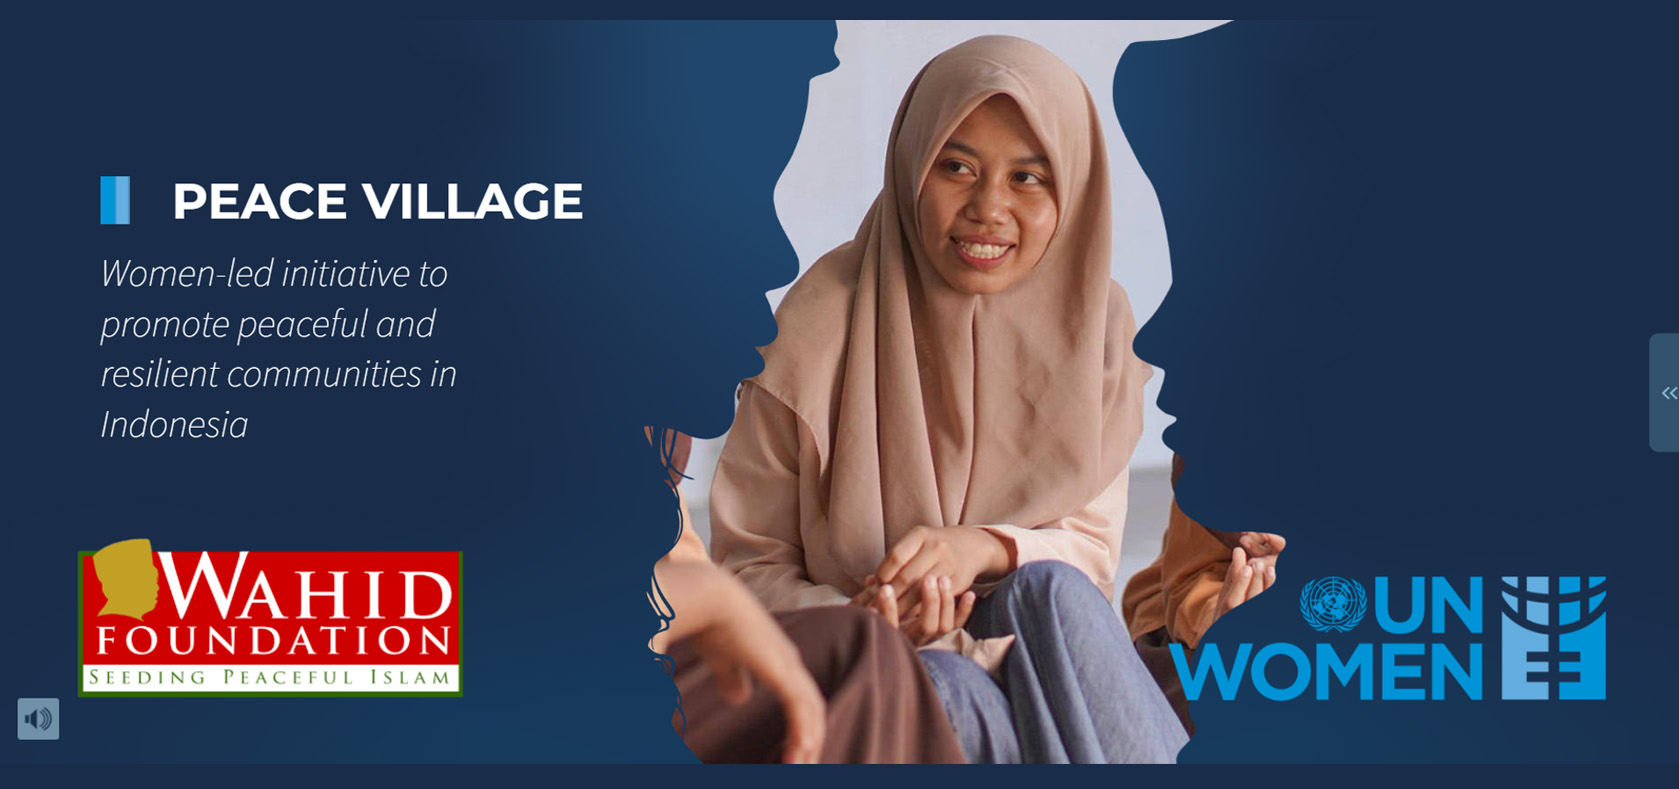 Engage with the stories of women in the Peace Village through the interactive story book below!